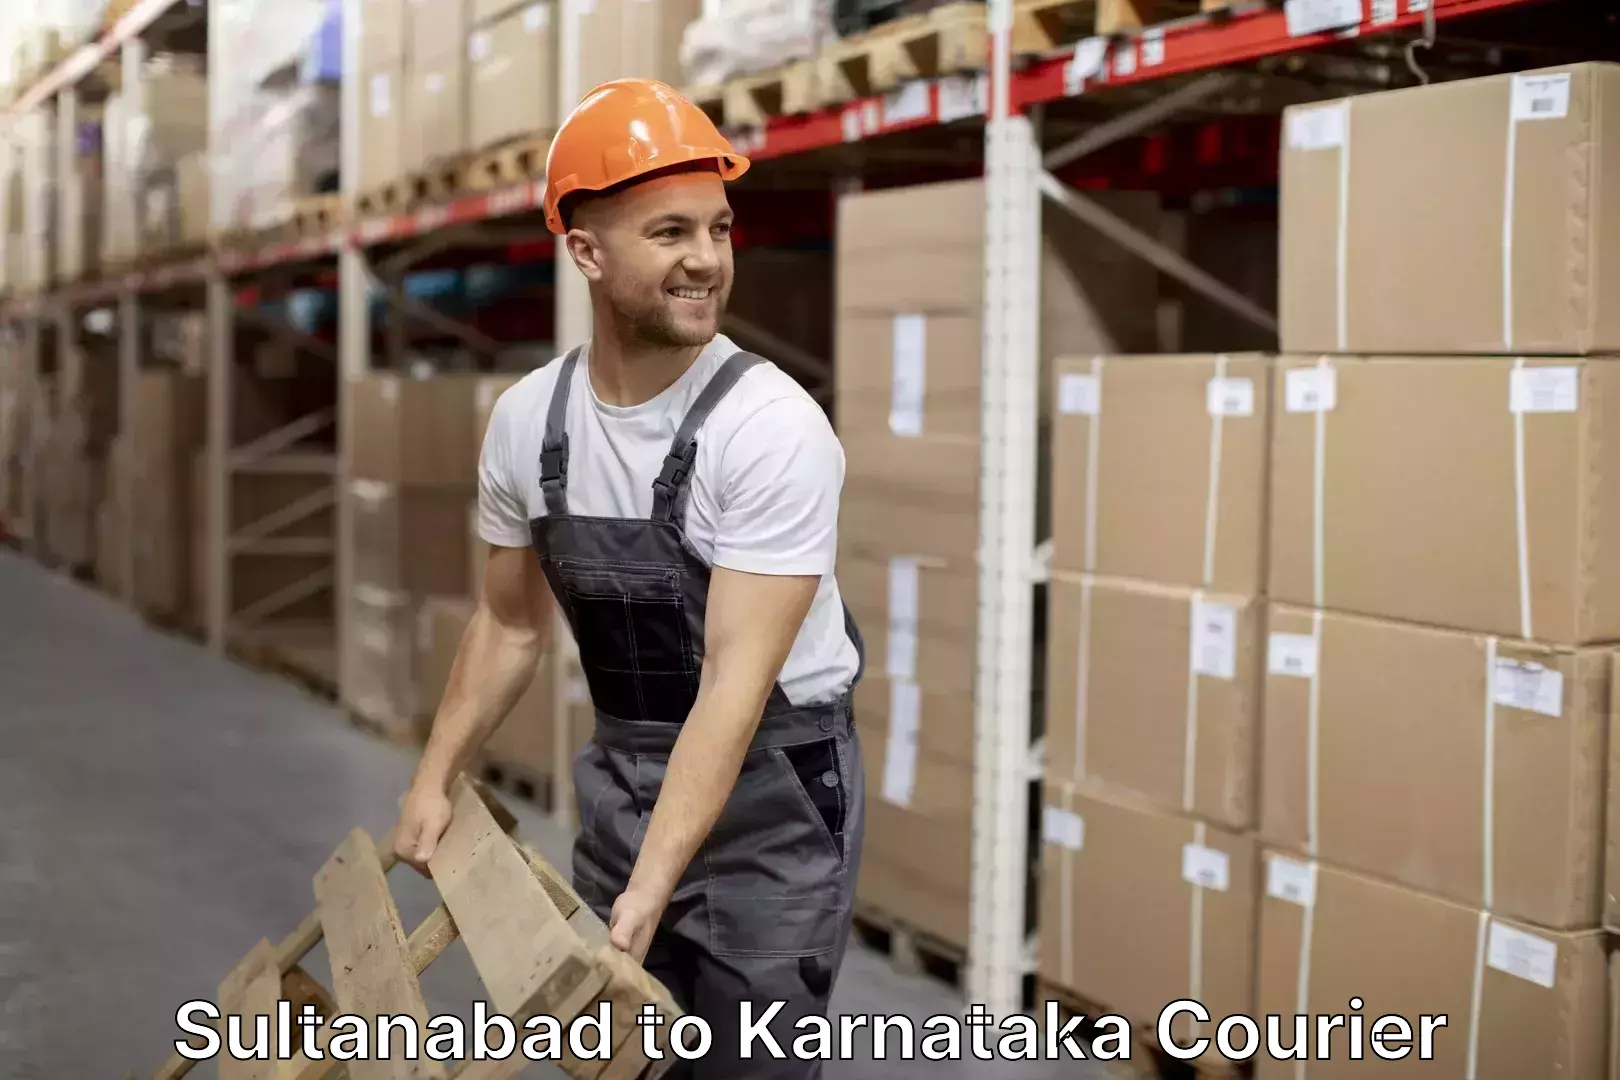 Furniture delivery service in Sultanabad to Karnataka